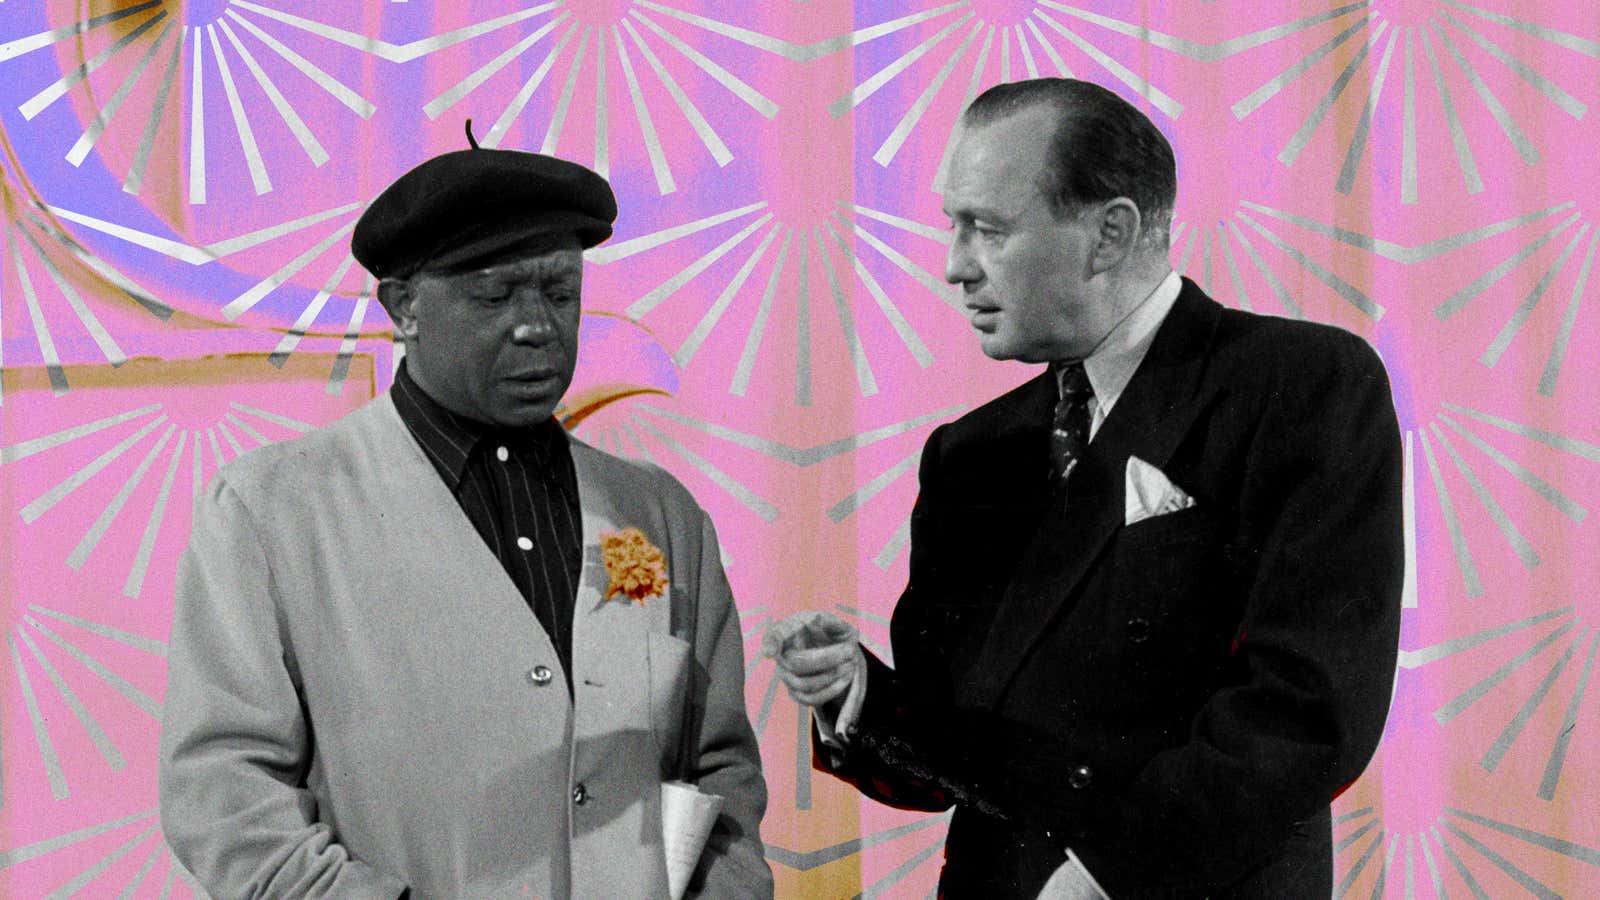 Eddie Anderson and Jack Benny in their television debut (Photo: Bettmann/Getty Images)